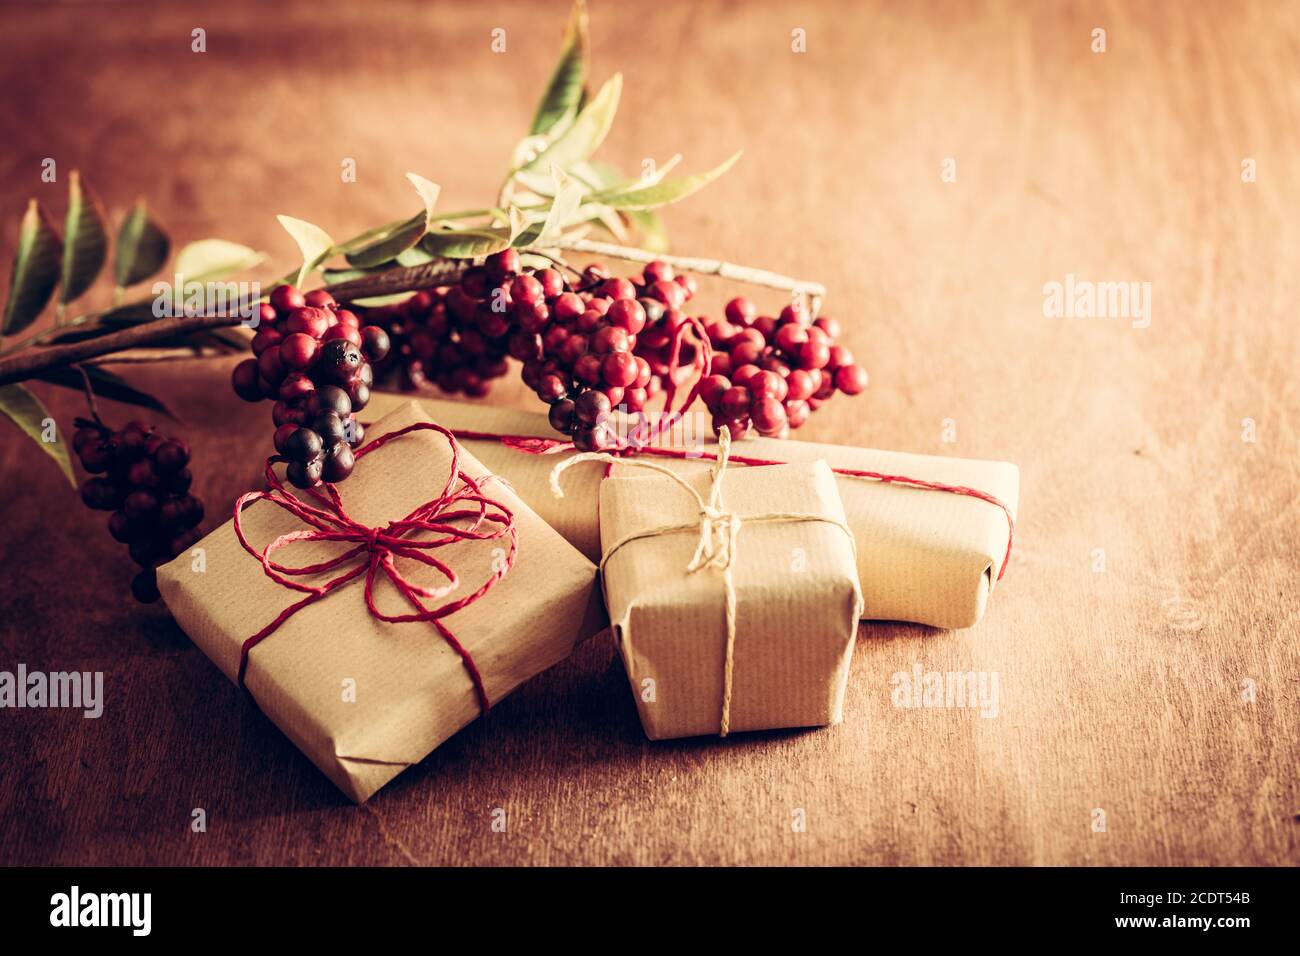 Rustic retro gift, present boxes with decorations. Christmas time, eco paper wrap. Stock Photo